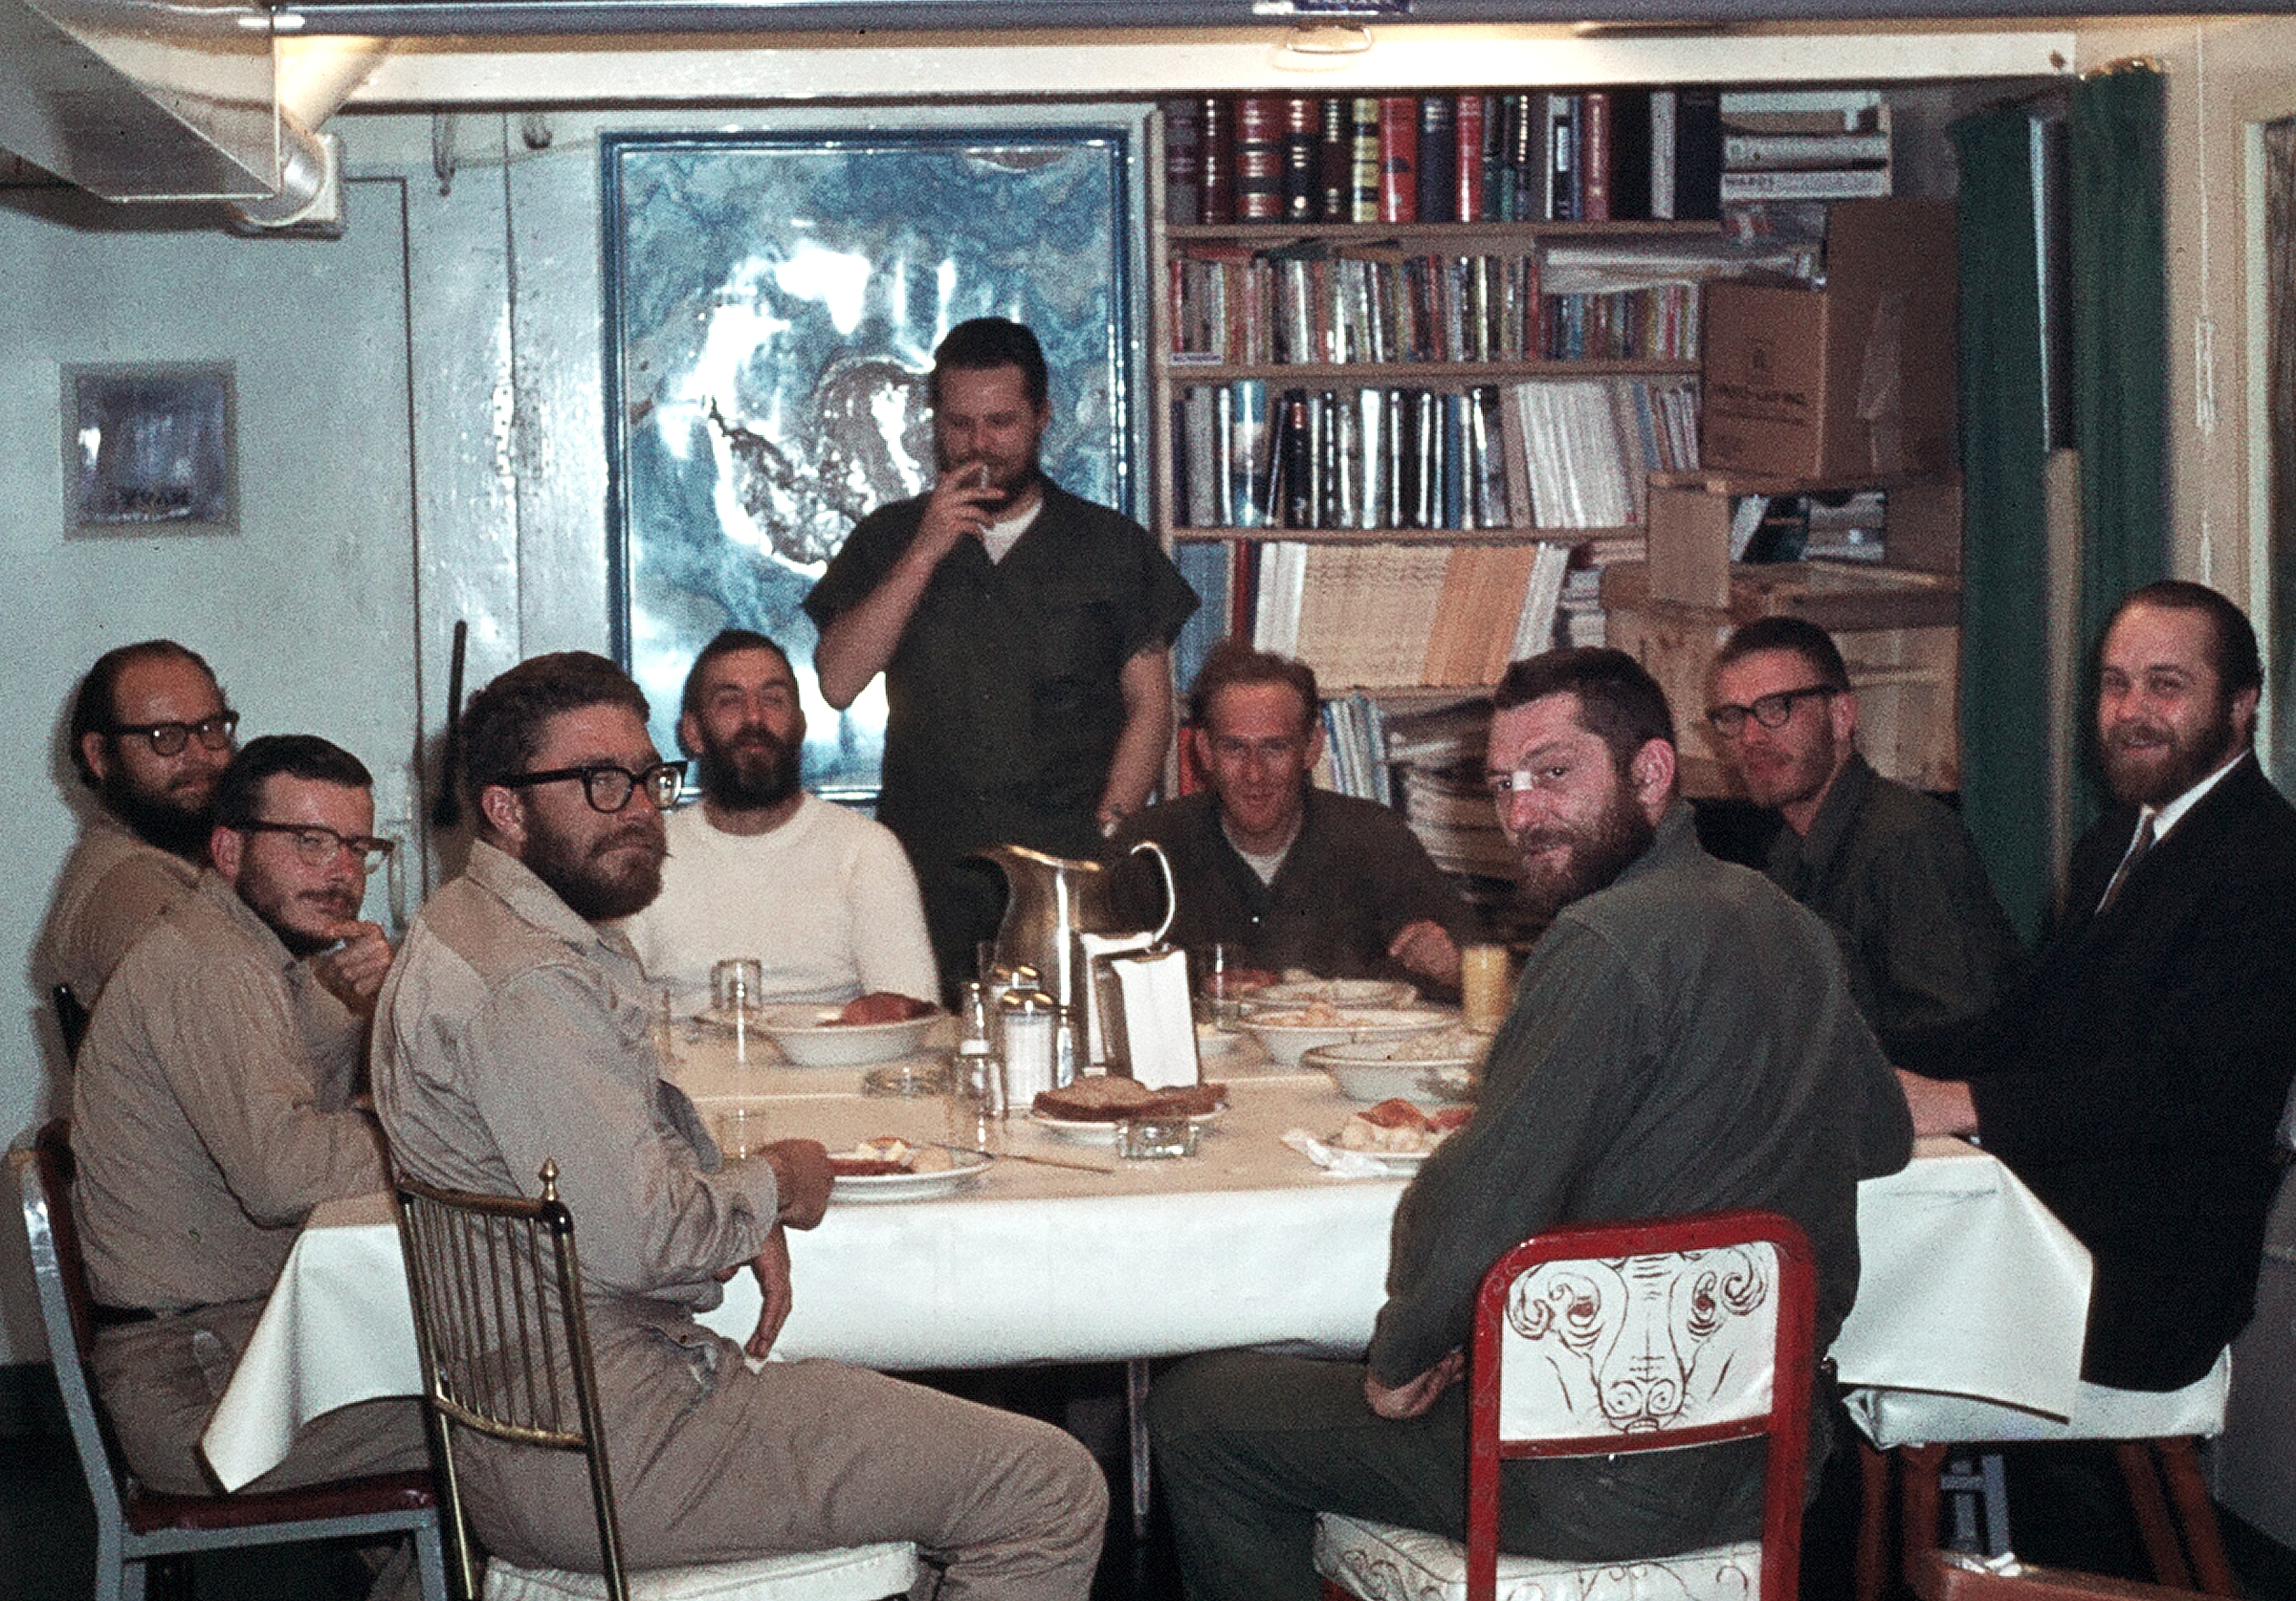 Men sit down at a table for a meal.